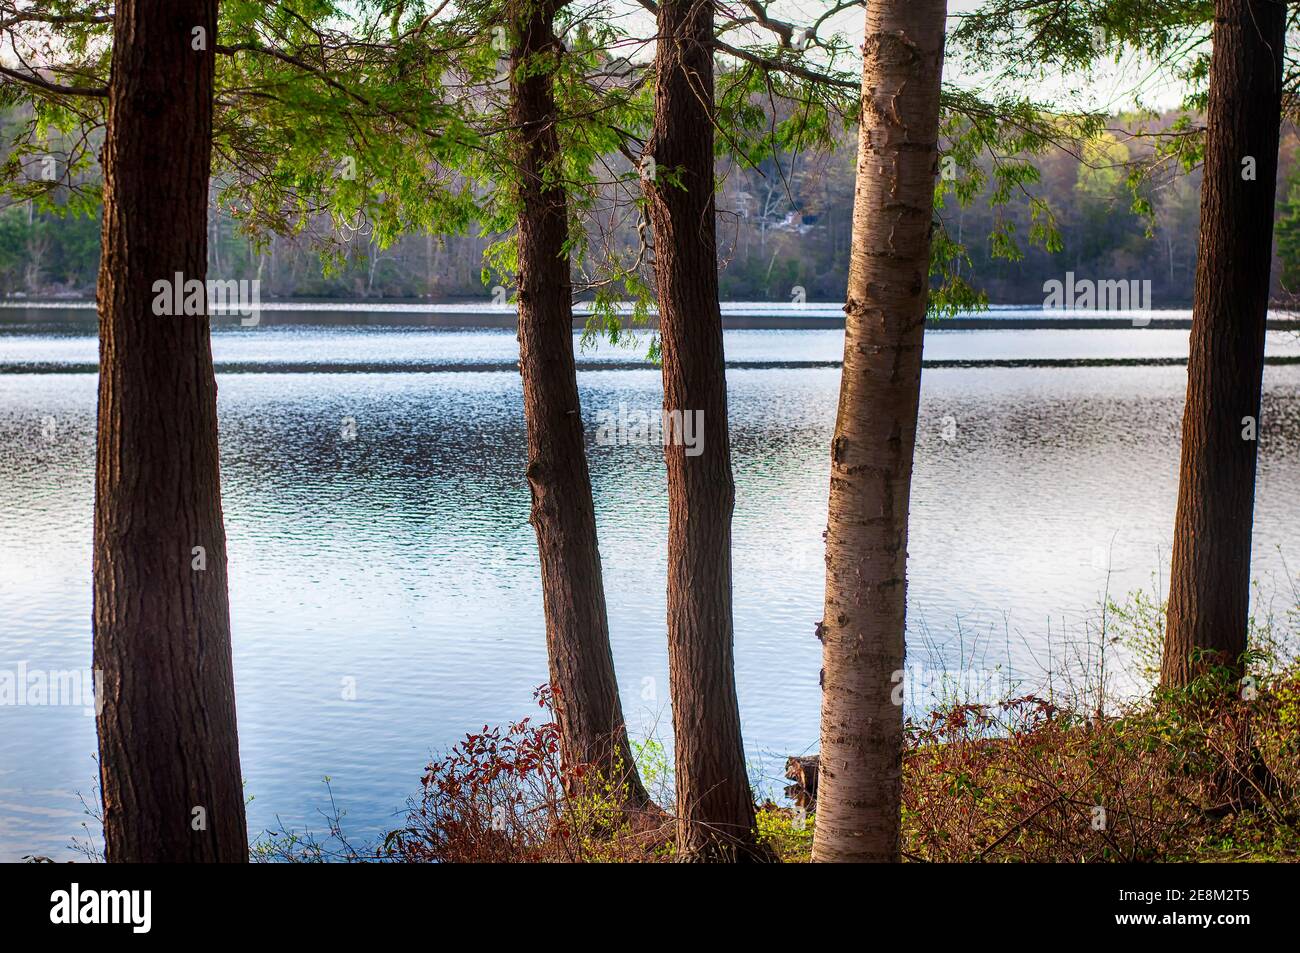 a view of Burr Pond through the trees in torrington connecticut on a spring day in litchfield connecticut. Stock Photo